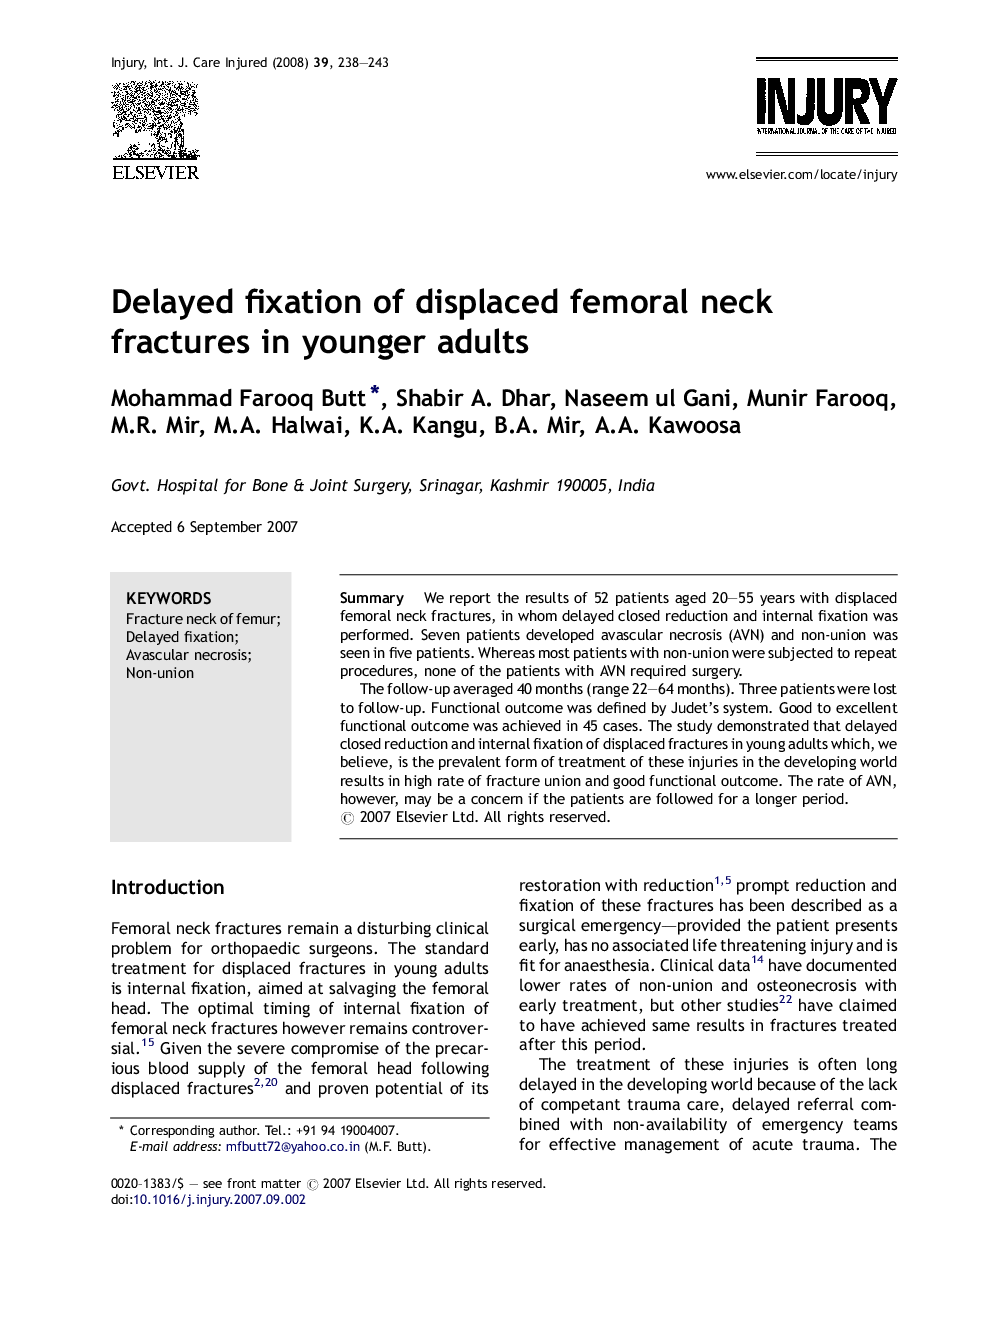 Delayed fixation of displaced femoral neck fractures in younger adults